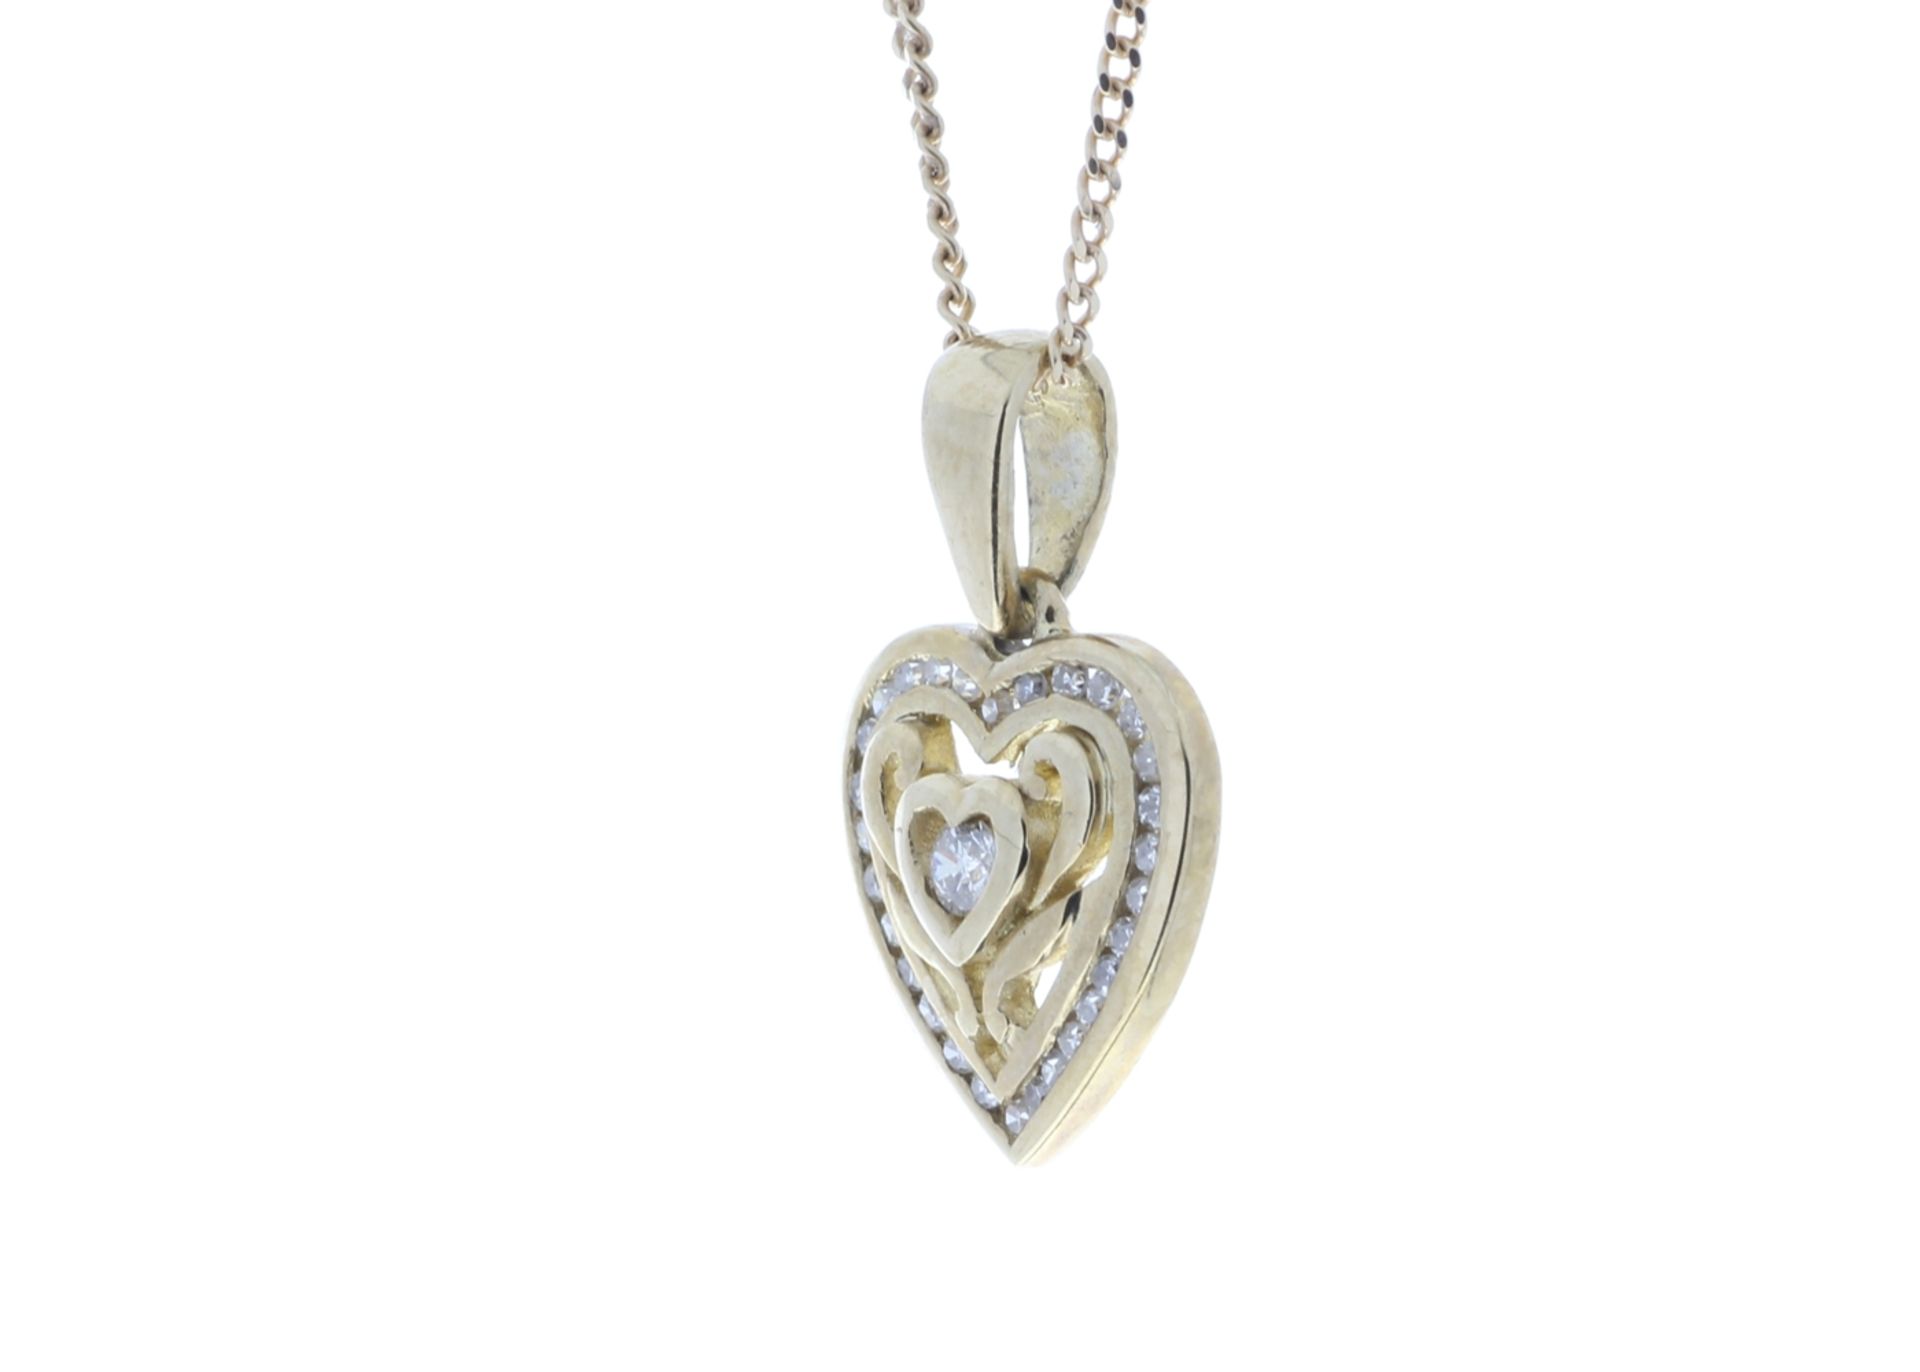 9ct Yellow Gold Heart Pendant Set With Diamonds With Centre Heart and Swirls 0.18 Carats - Image 4 of 5